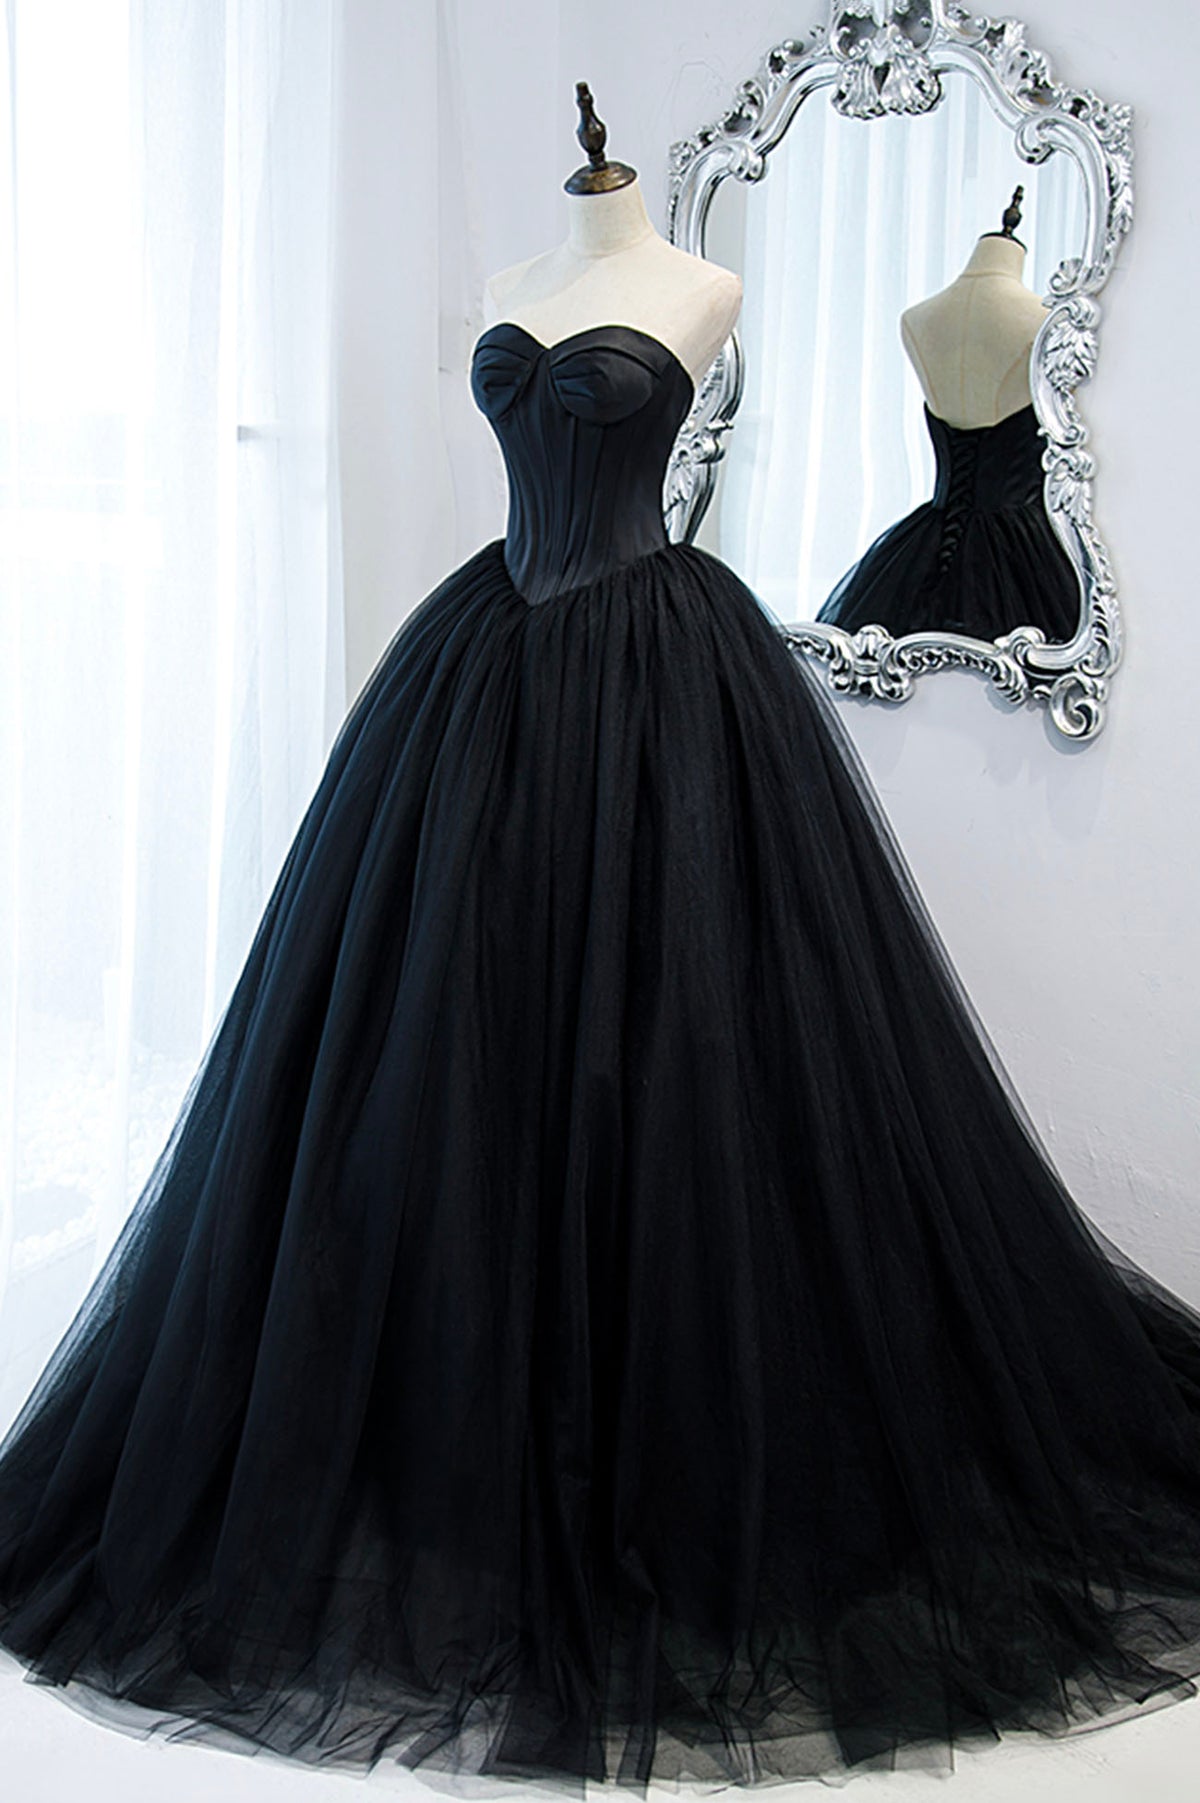 Black Strapless Tulle Long A-Line Prom Dress, Black Formal Evening Gown